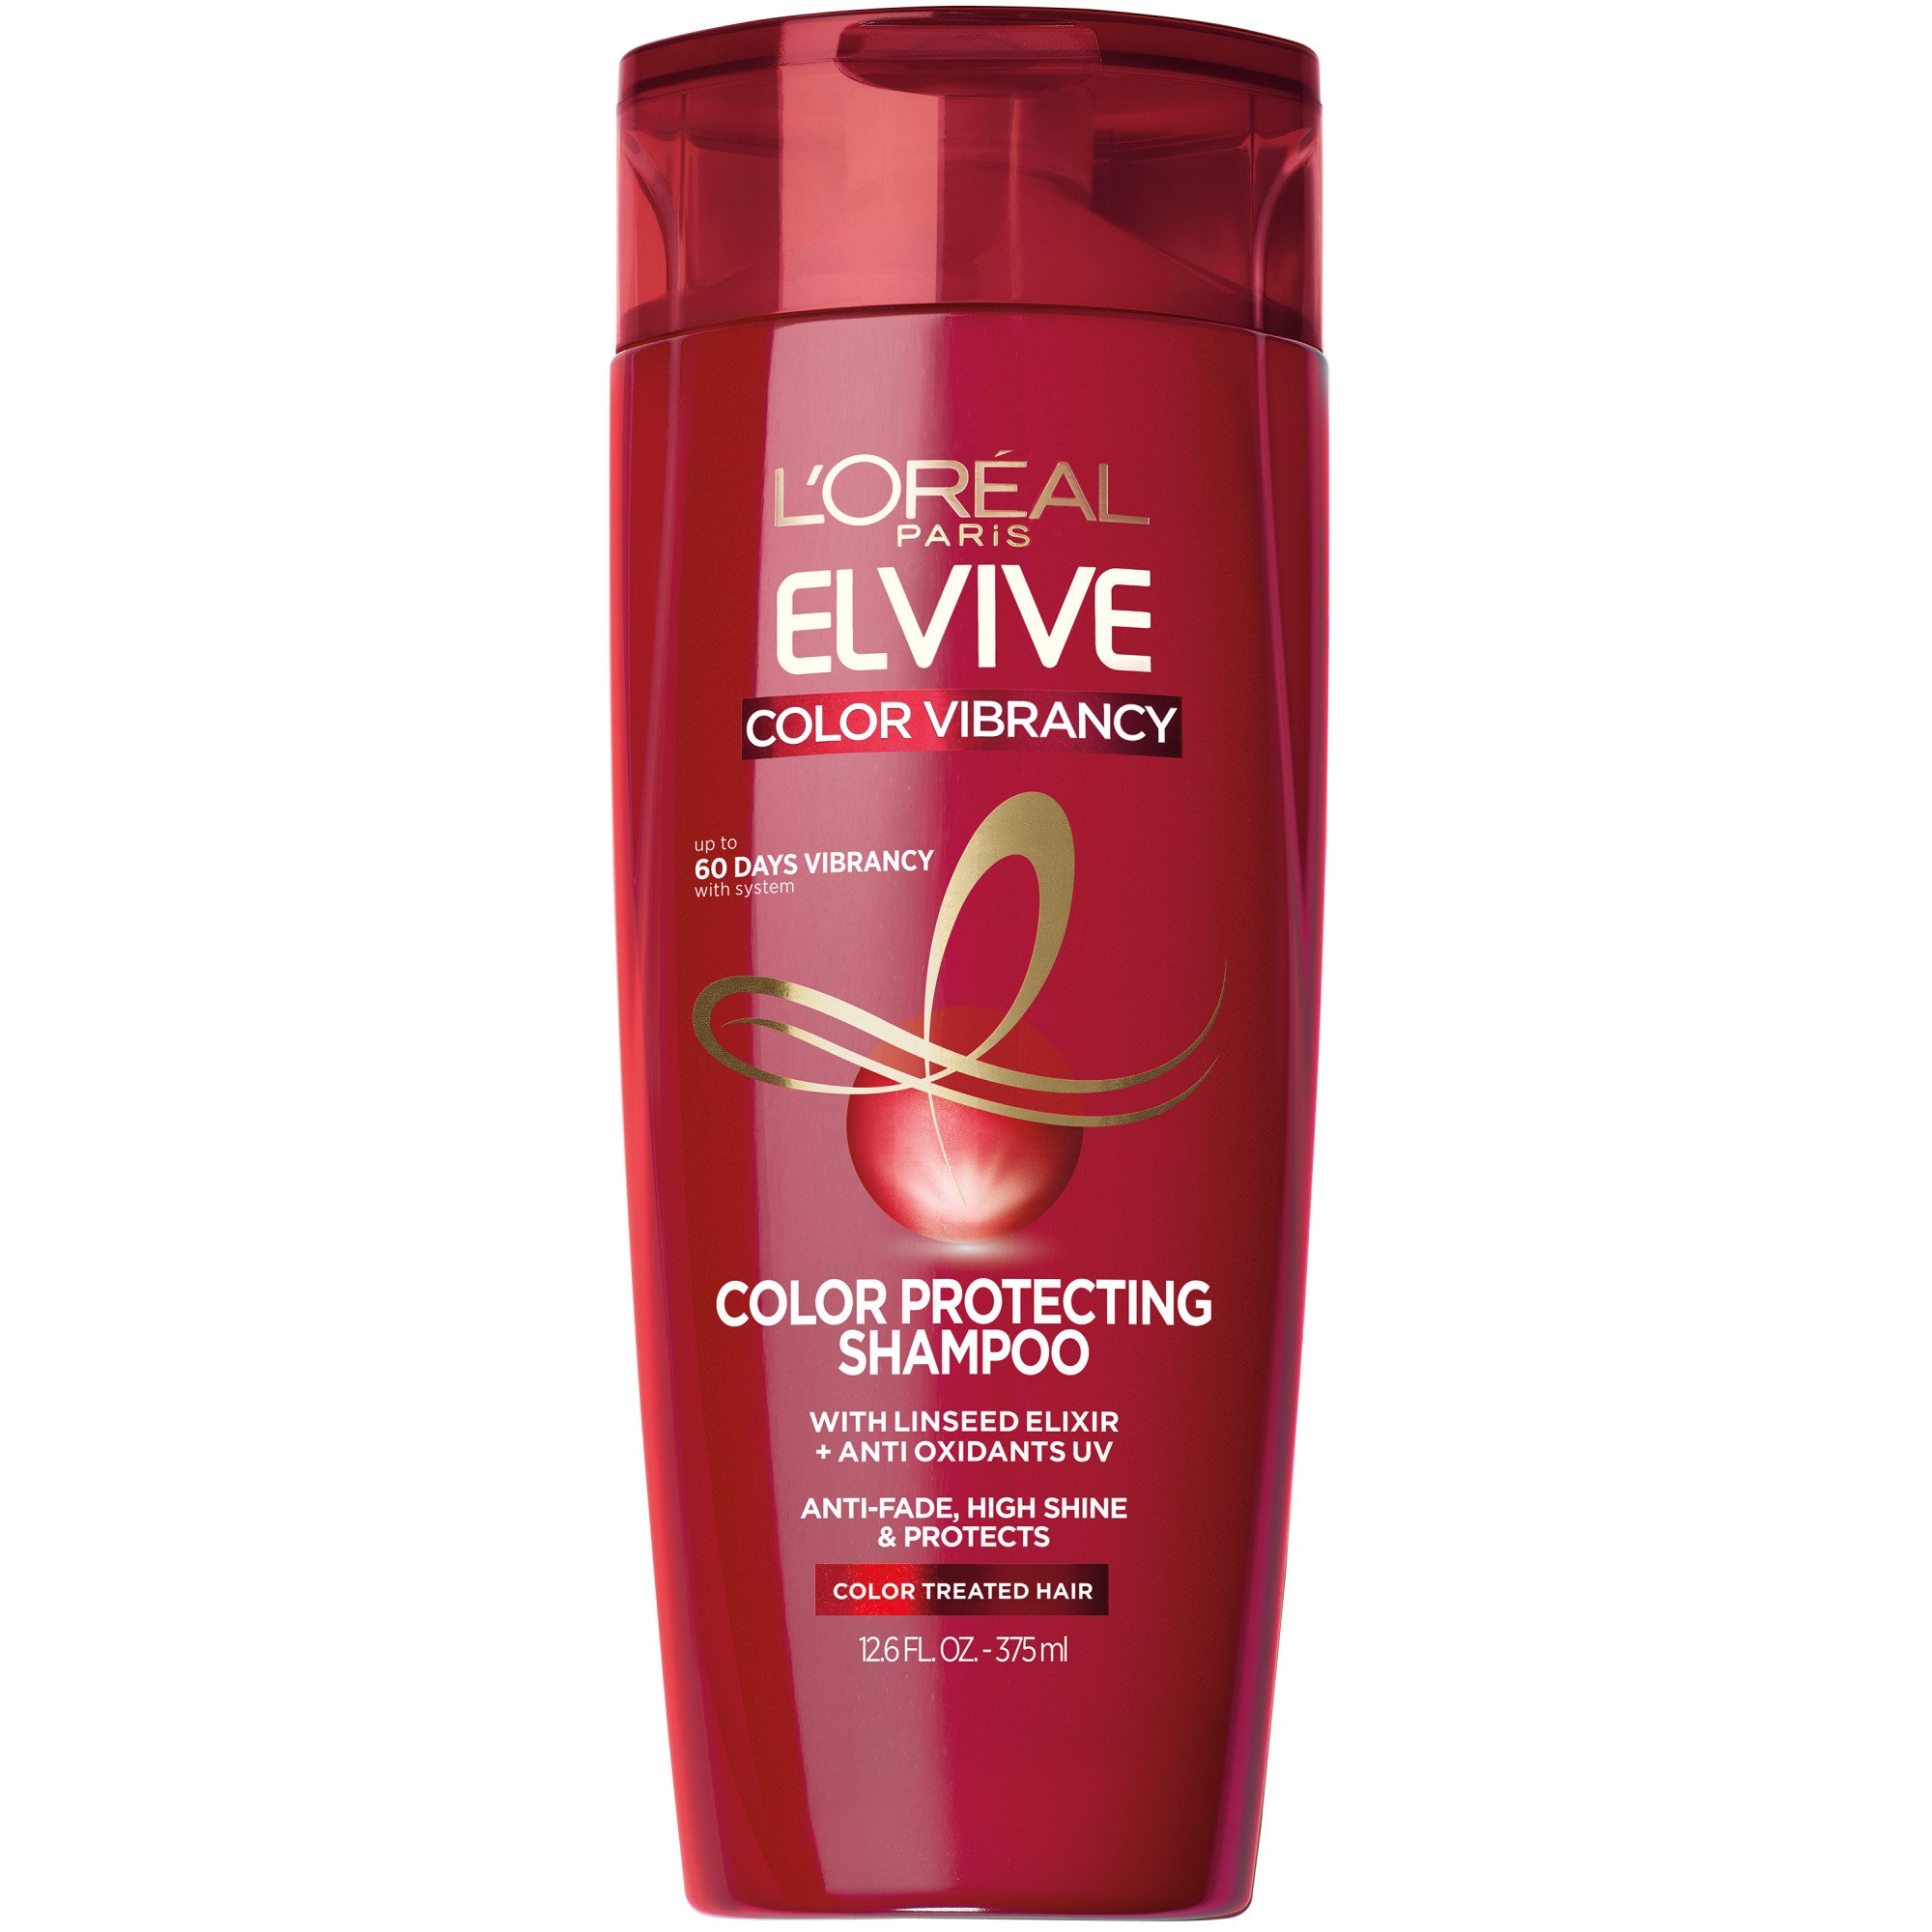 L'Oréal Paris Elvive Color Vibrancy Protecting Shampoo for Color Treated Hair - Shampoo & Conditioner at H-E-B